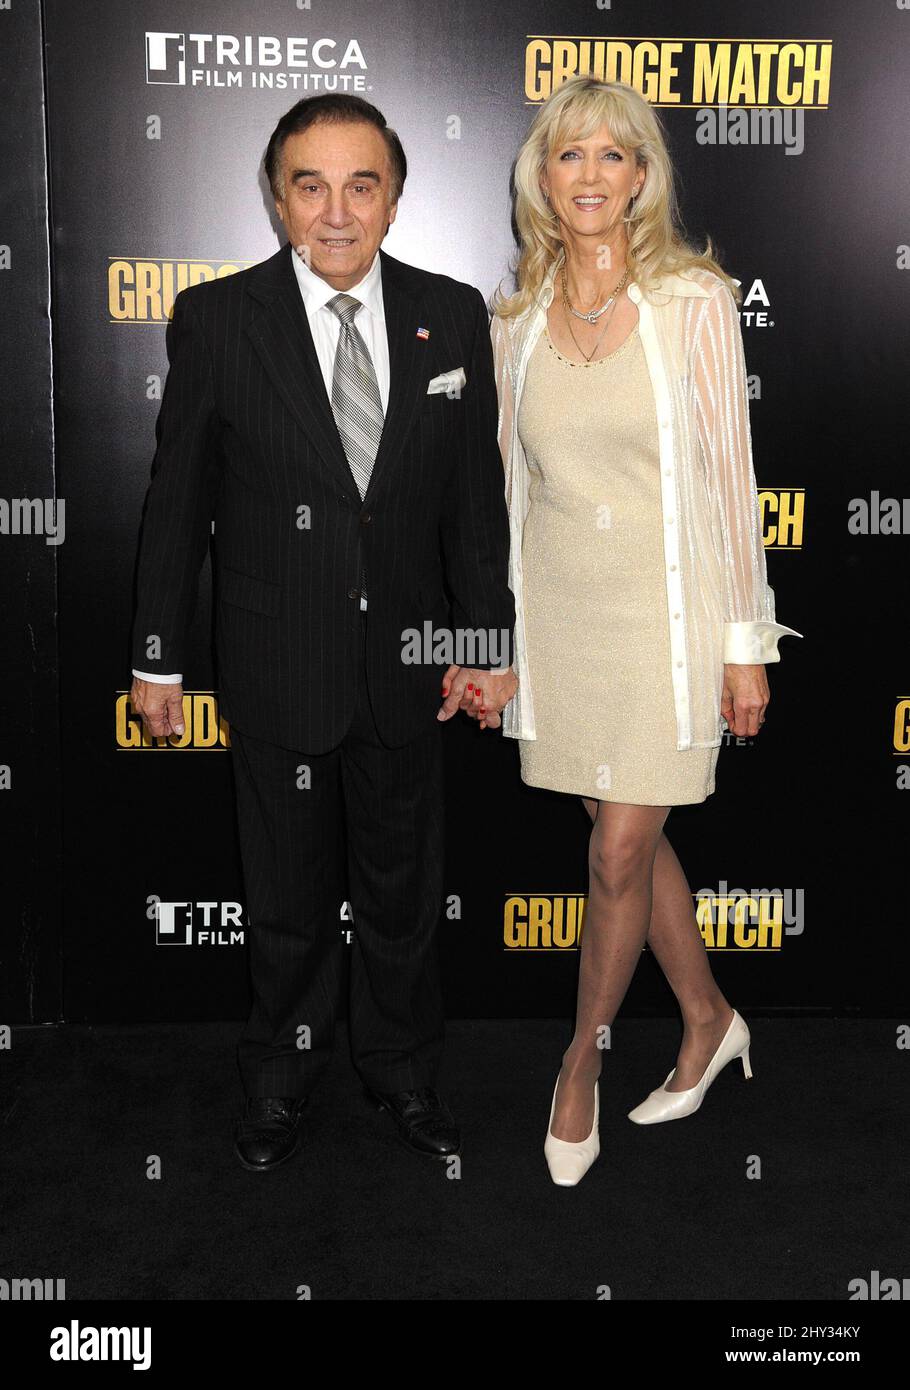 Tony Lo Bianco attending the Grudge Match premiere in New York. Stock Photo